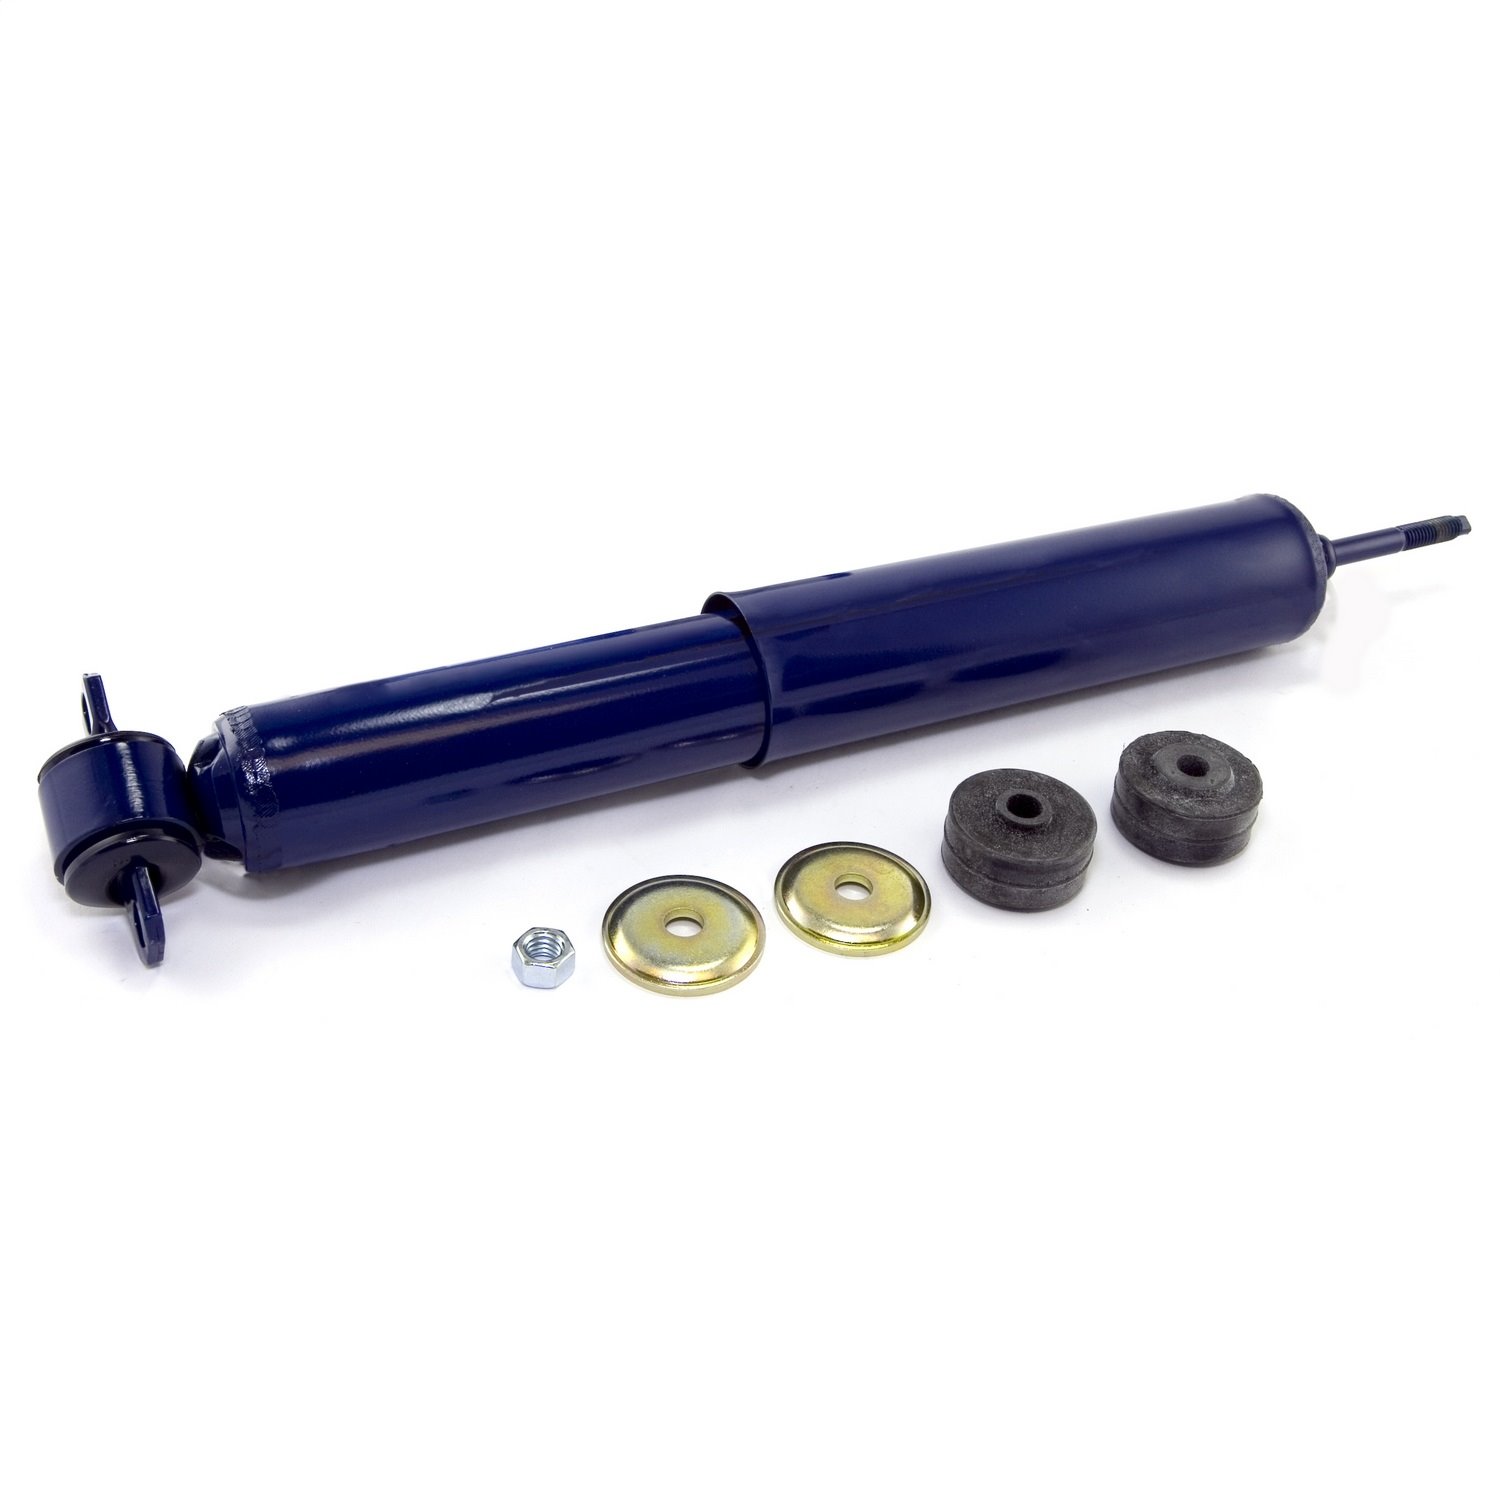 Replacement front shock absorber from Omix-ADA, Fits 93-98 Jeep Grand Cherokee ZJ